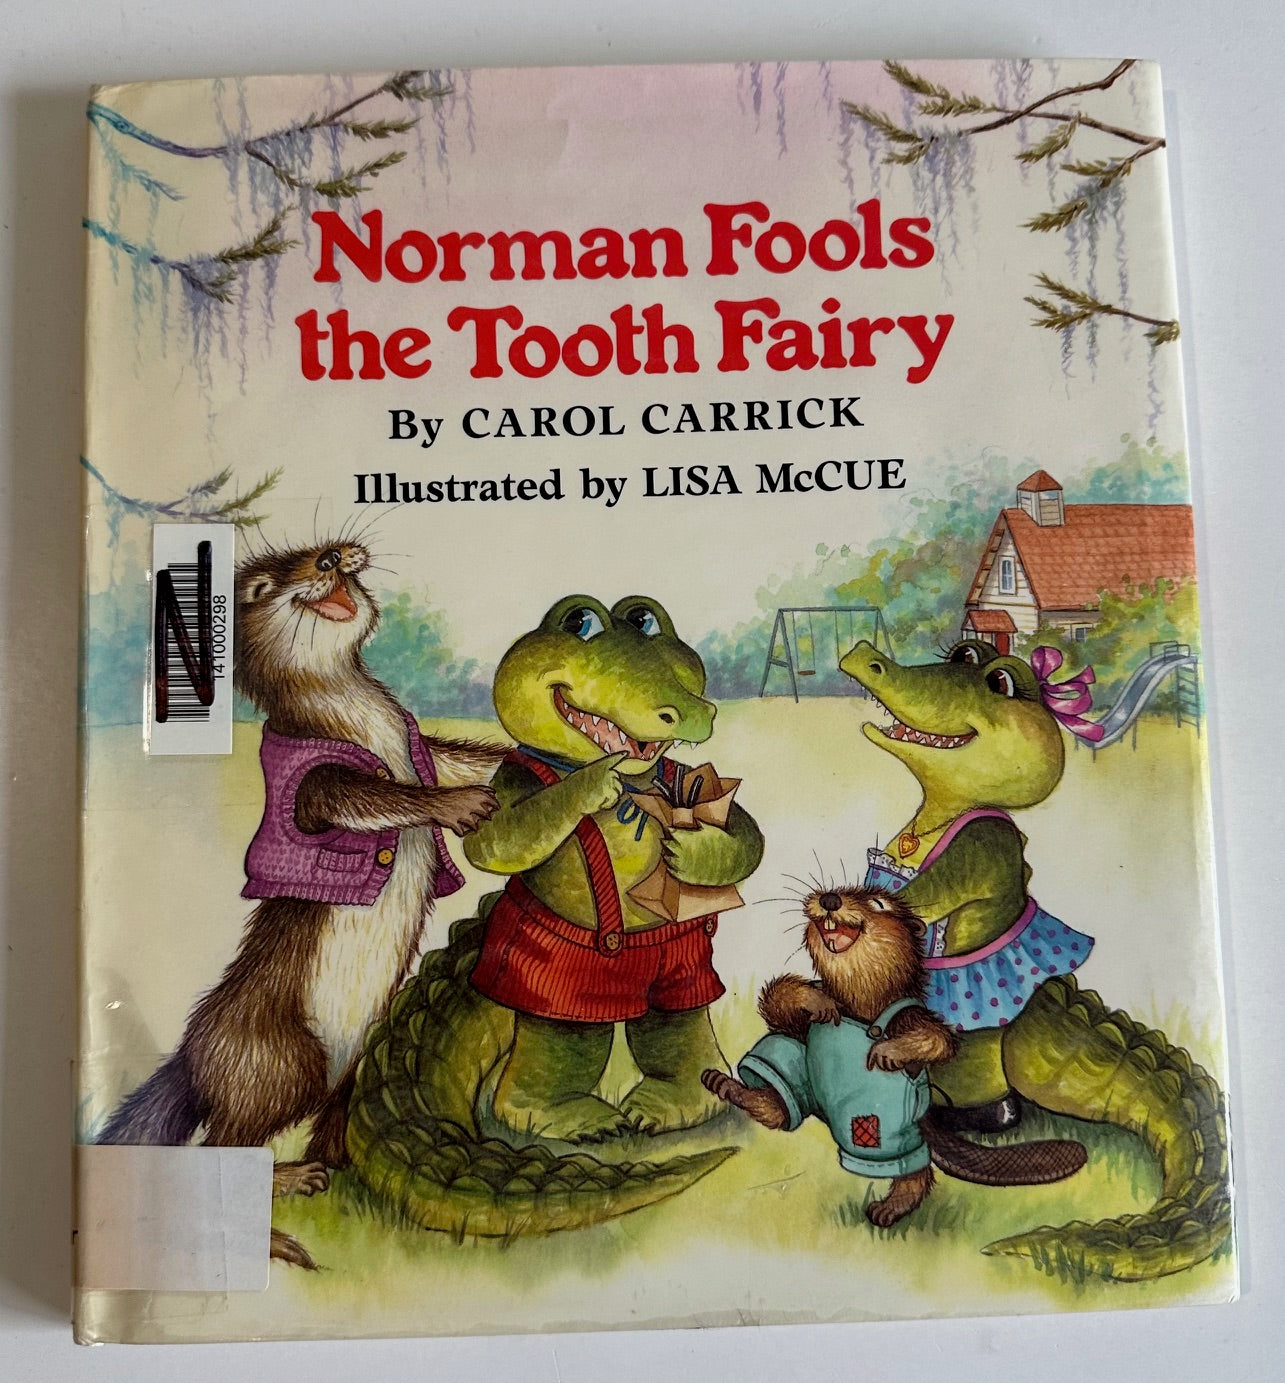 "Norman Fools the Tooth Fairy"